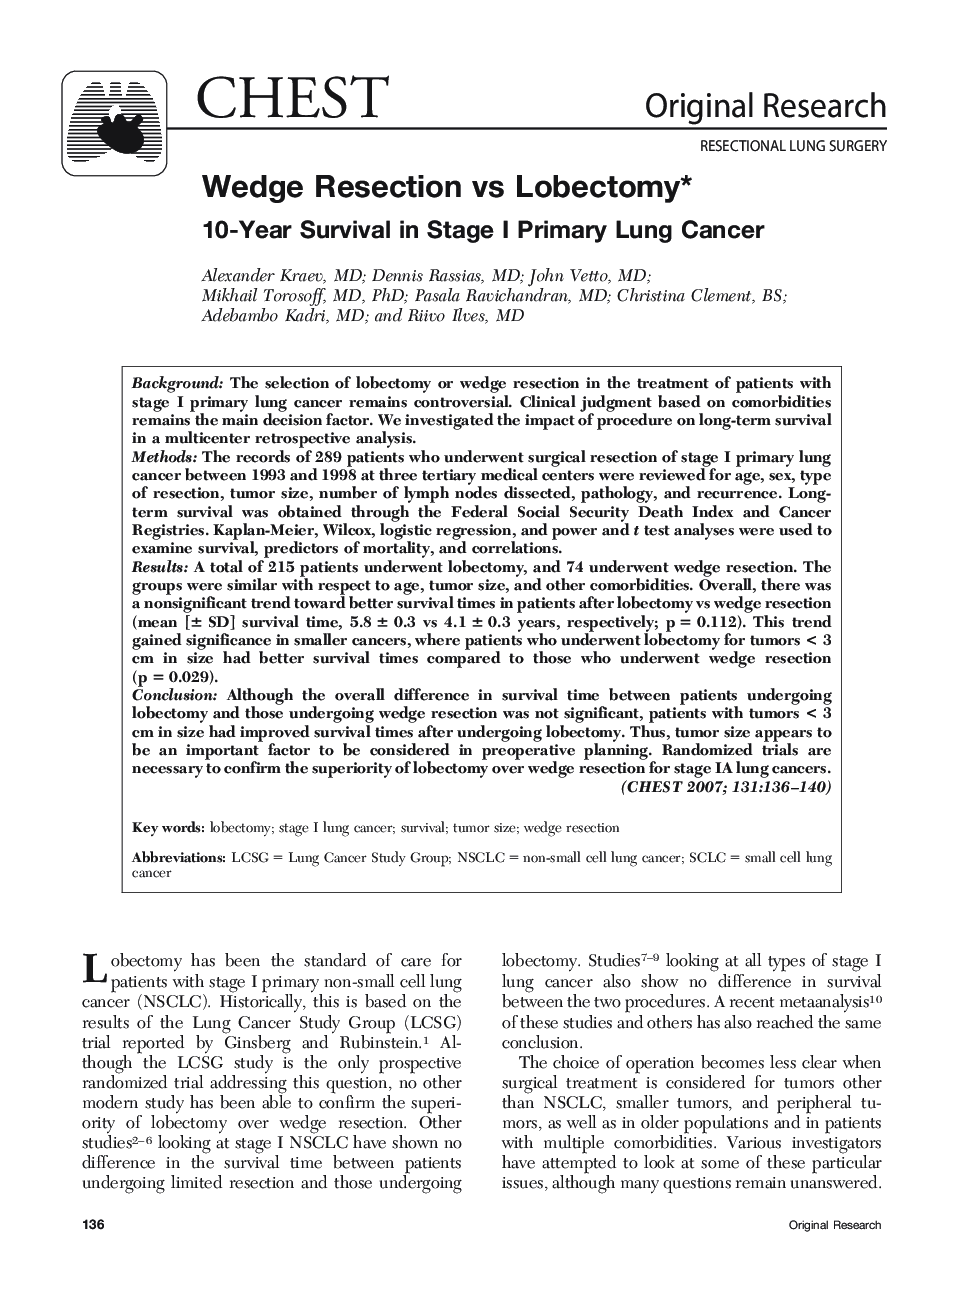 Wedge Resection vs Lobectomy : 10-Year Survival in Stage I Primary Lung Cancer